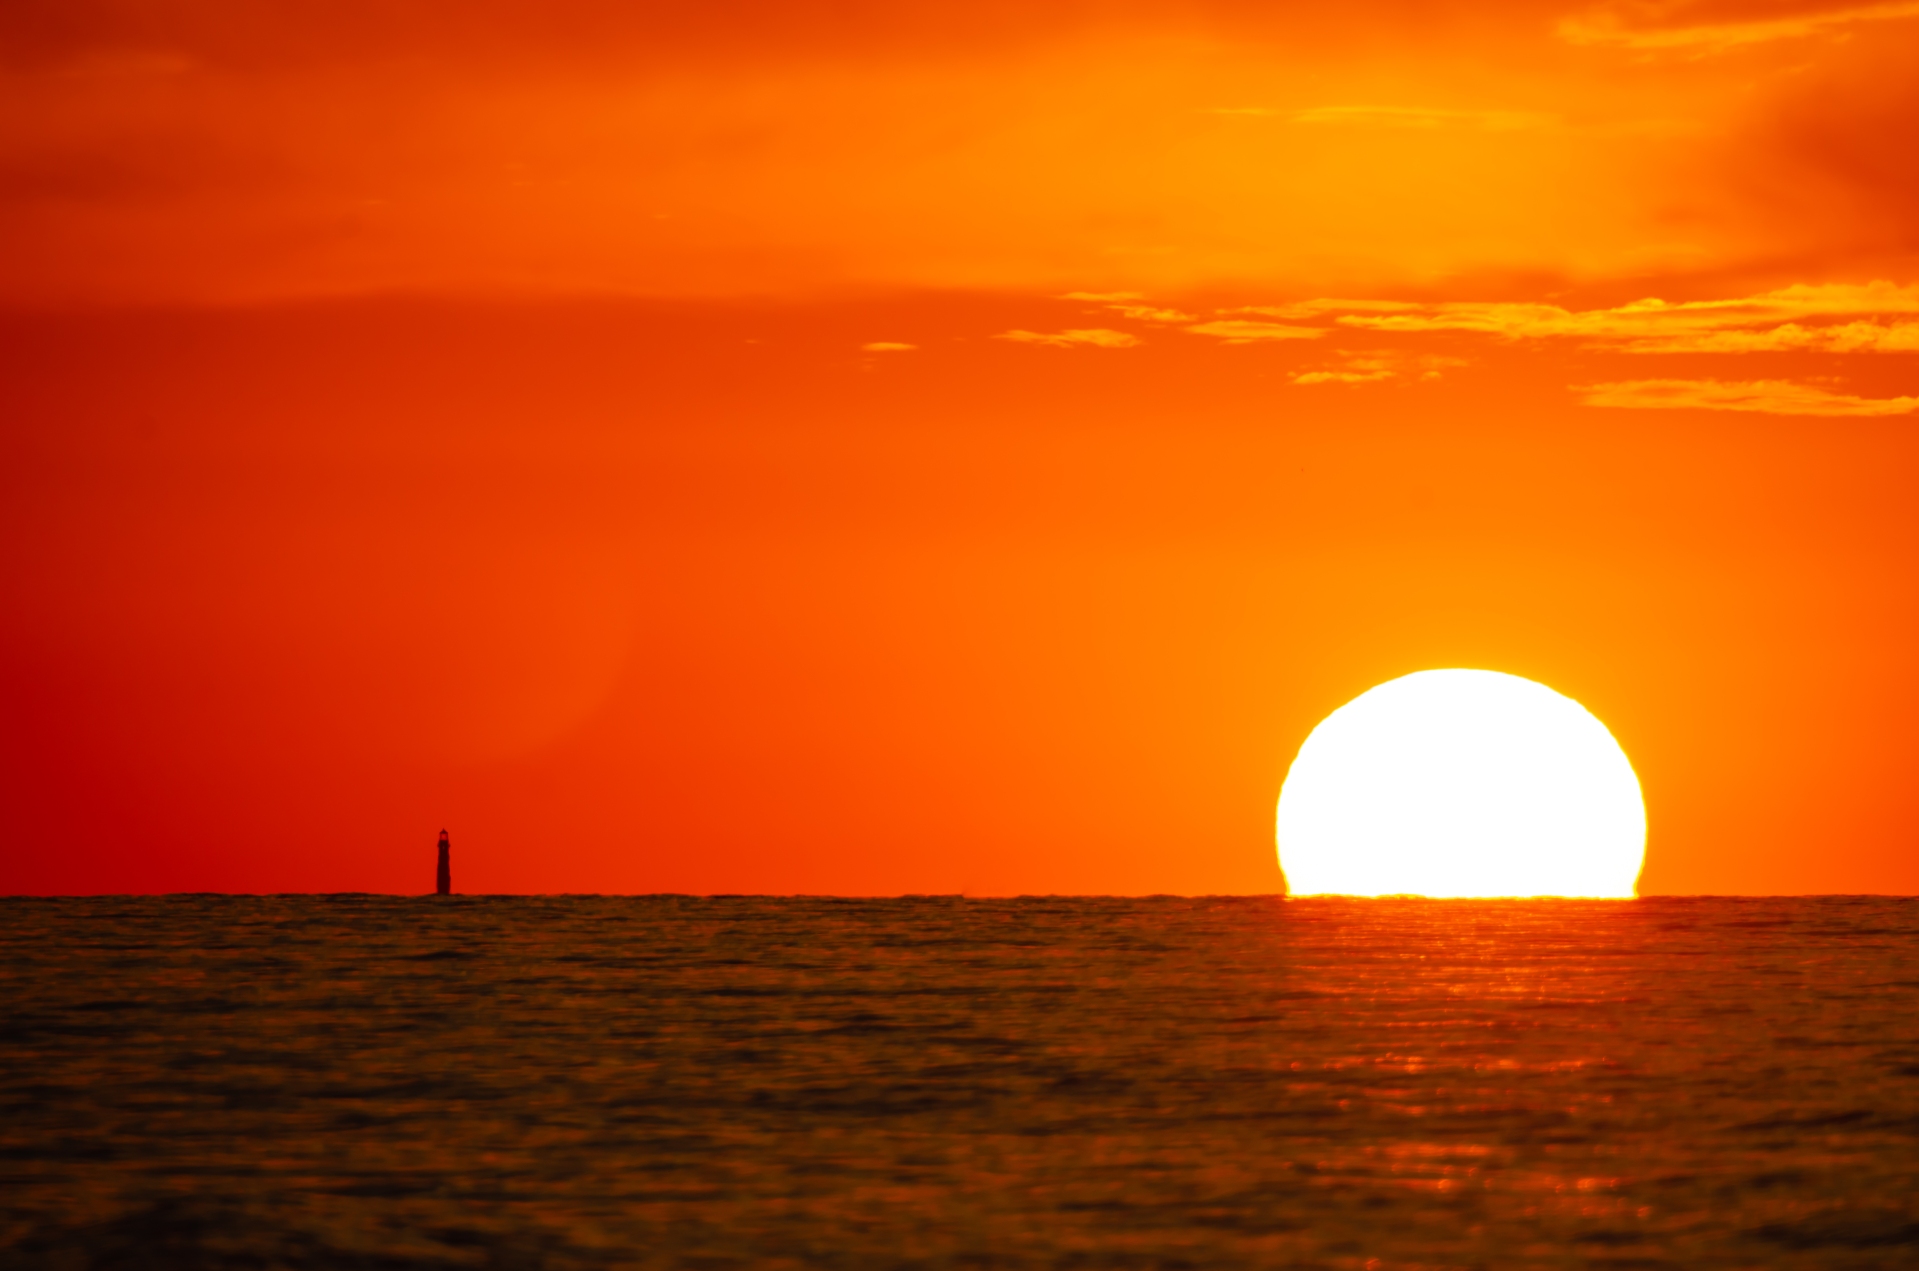 Orange: Lighthouse at Sunset in the Gulf of Mexico